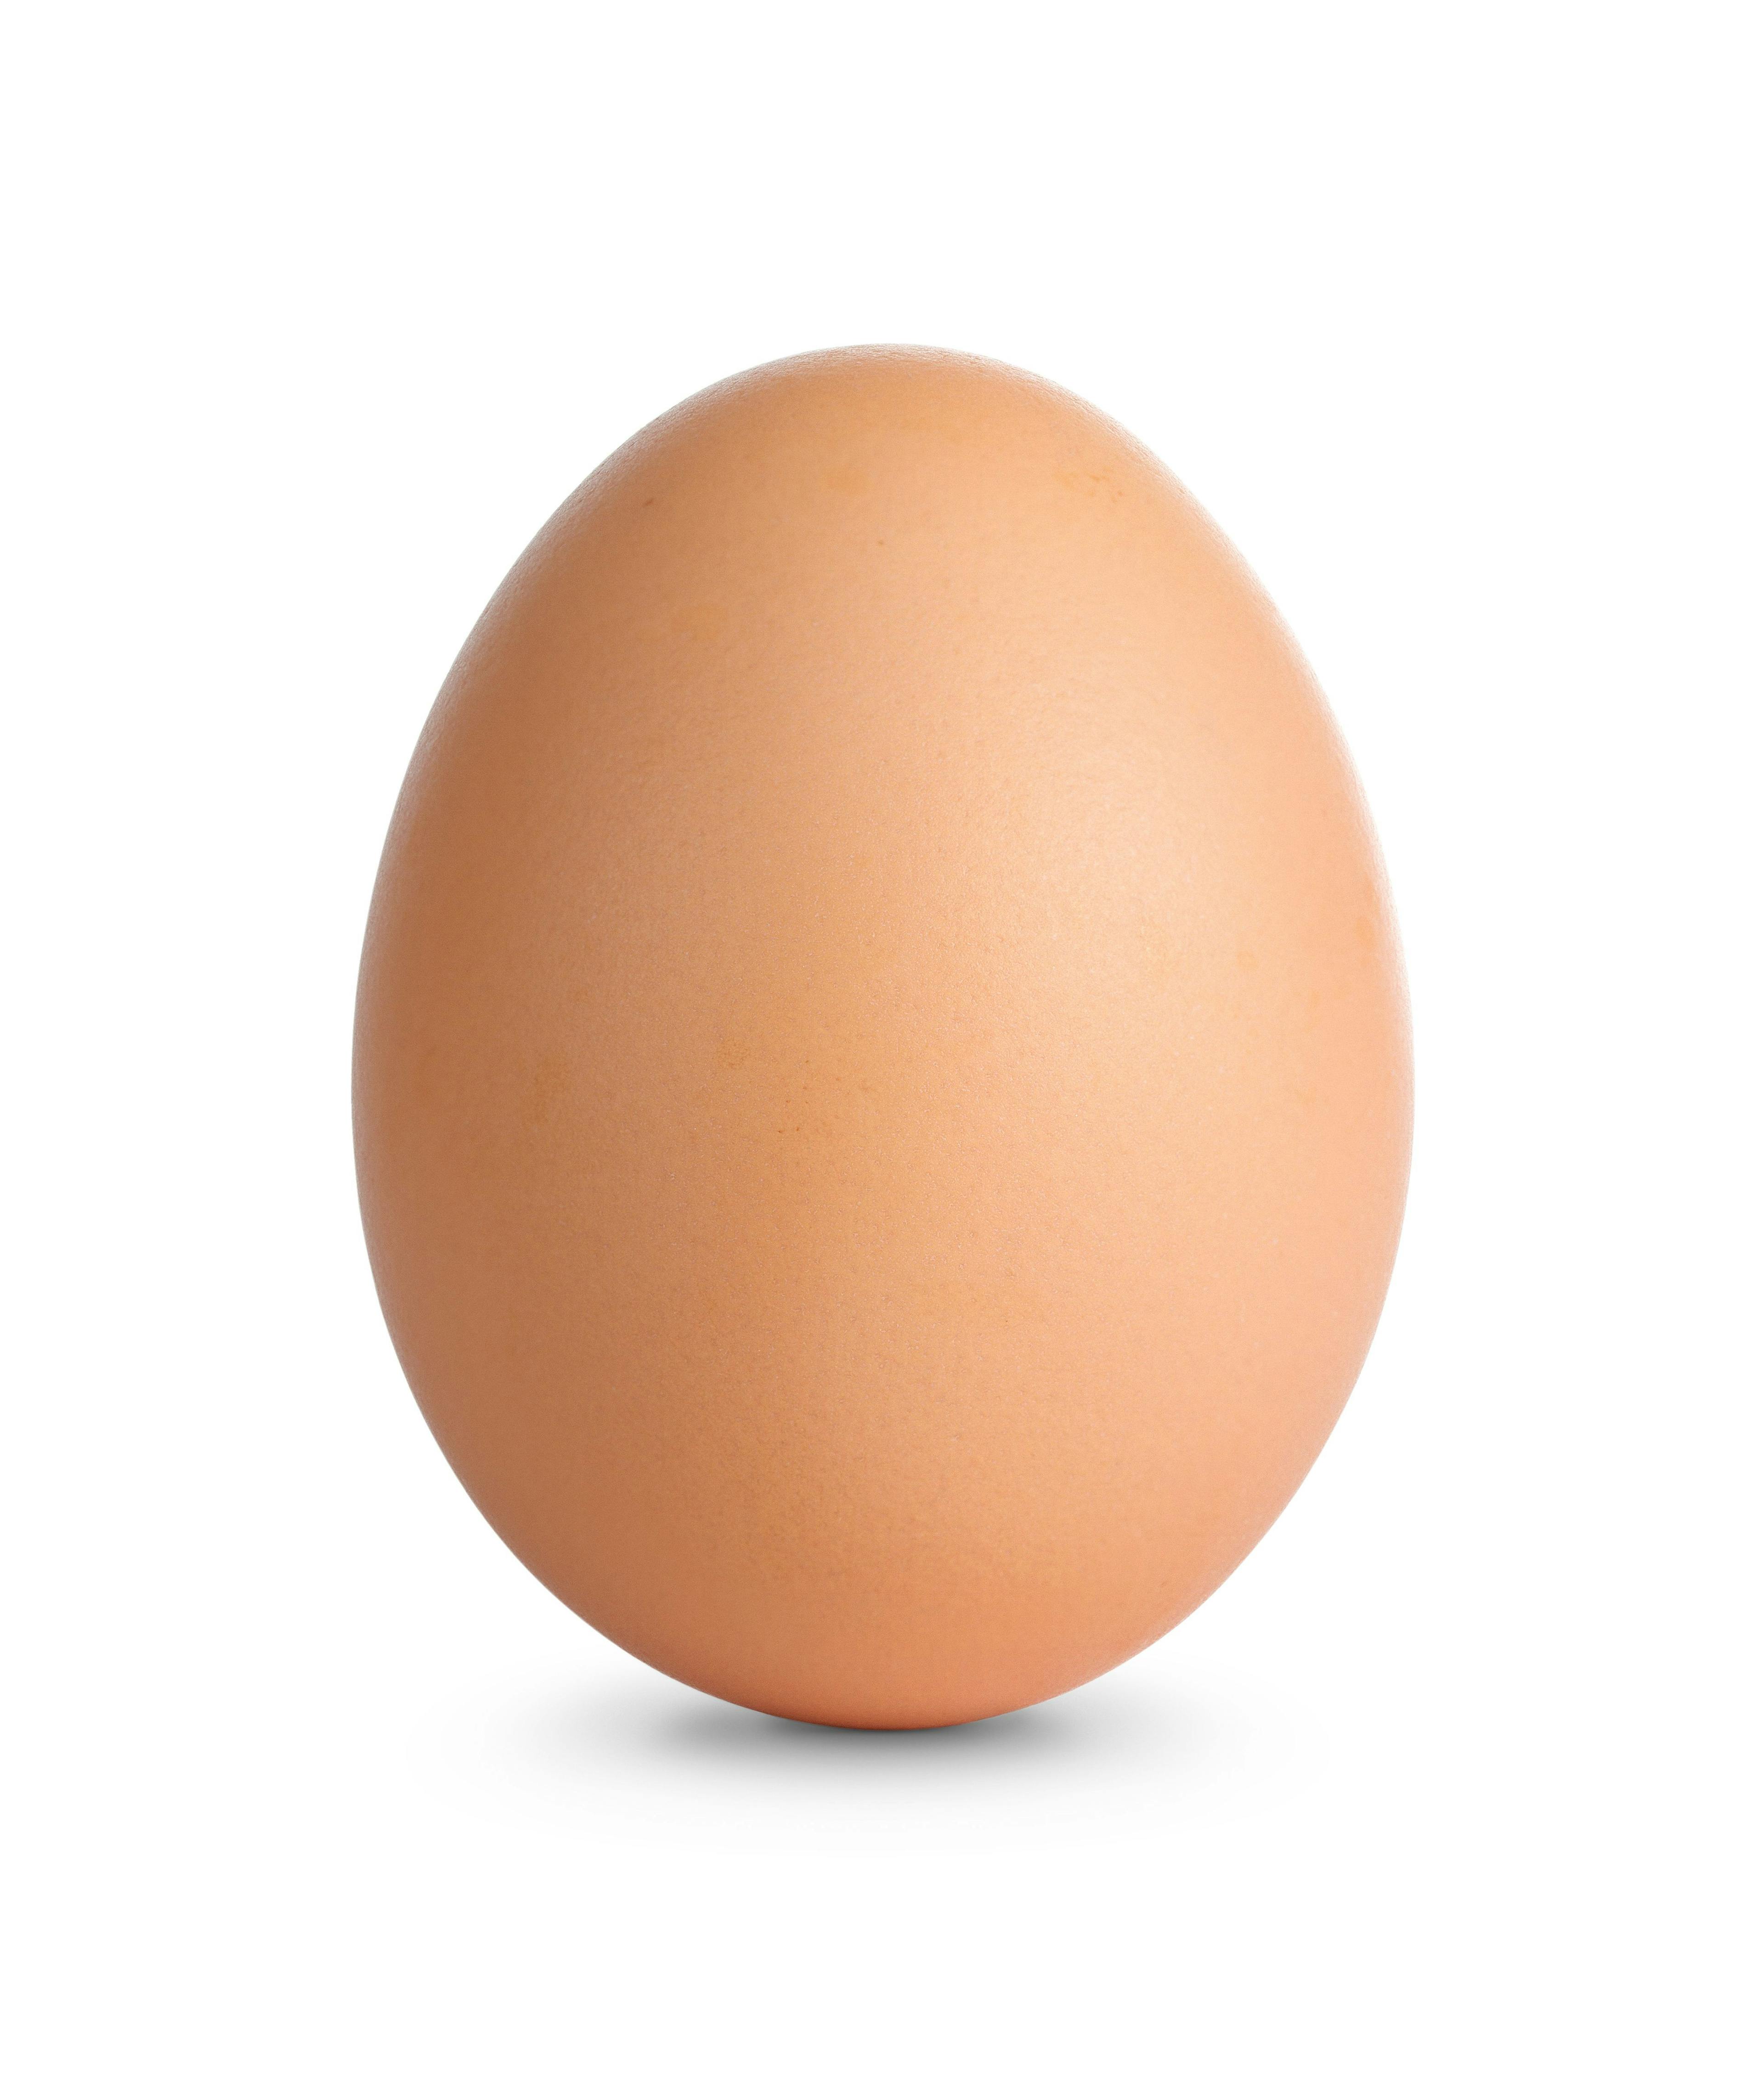 Close up of an egg isolated on white with clipping path | Image Credit: © rangizzz - stock.adobe.com